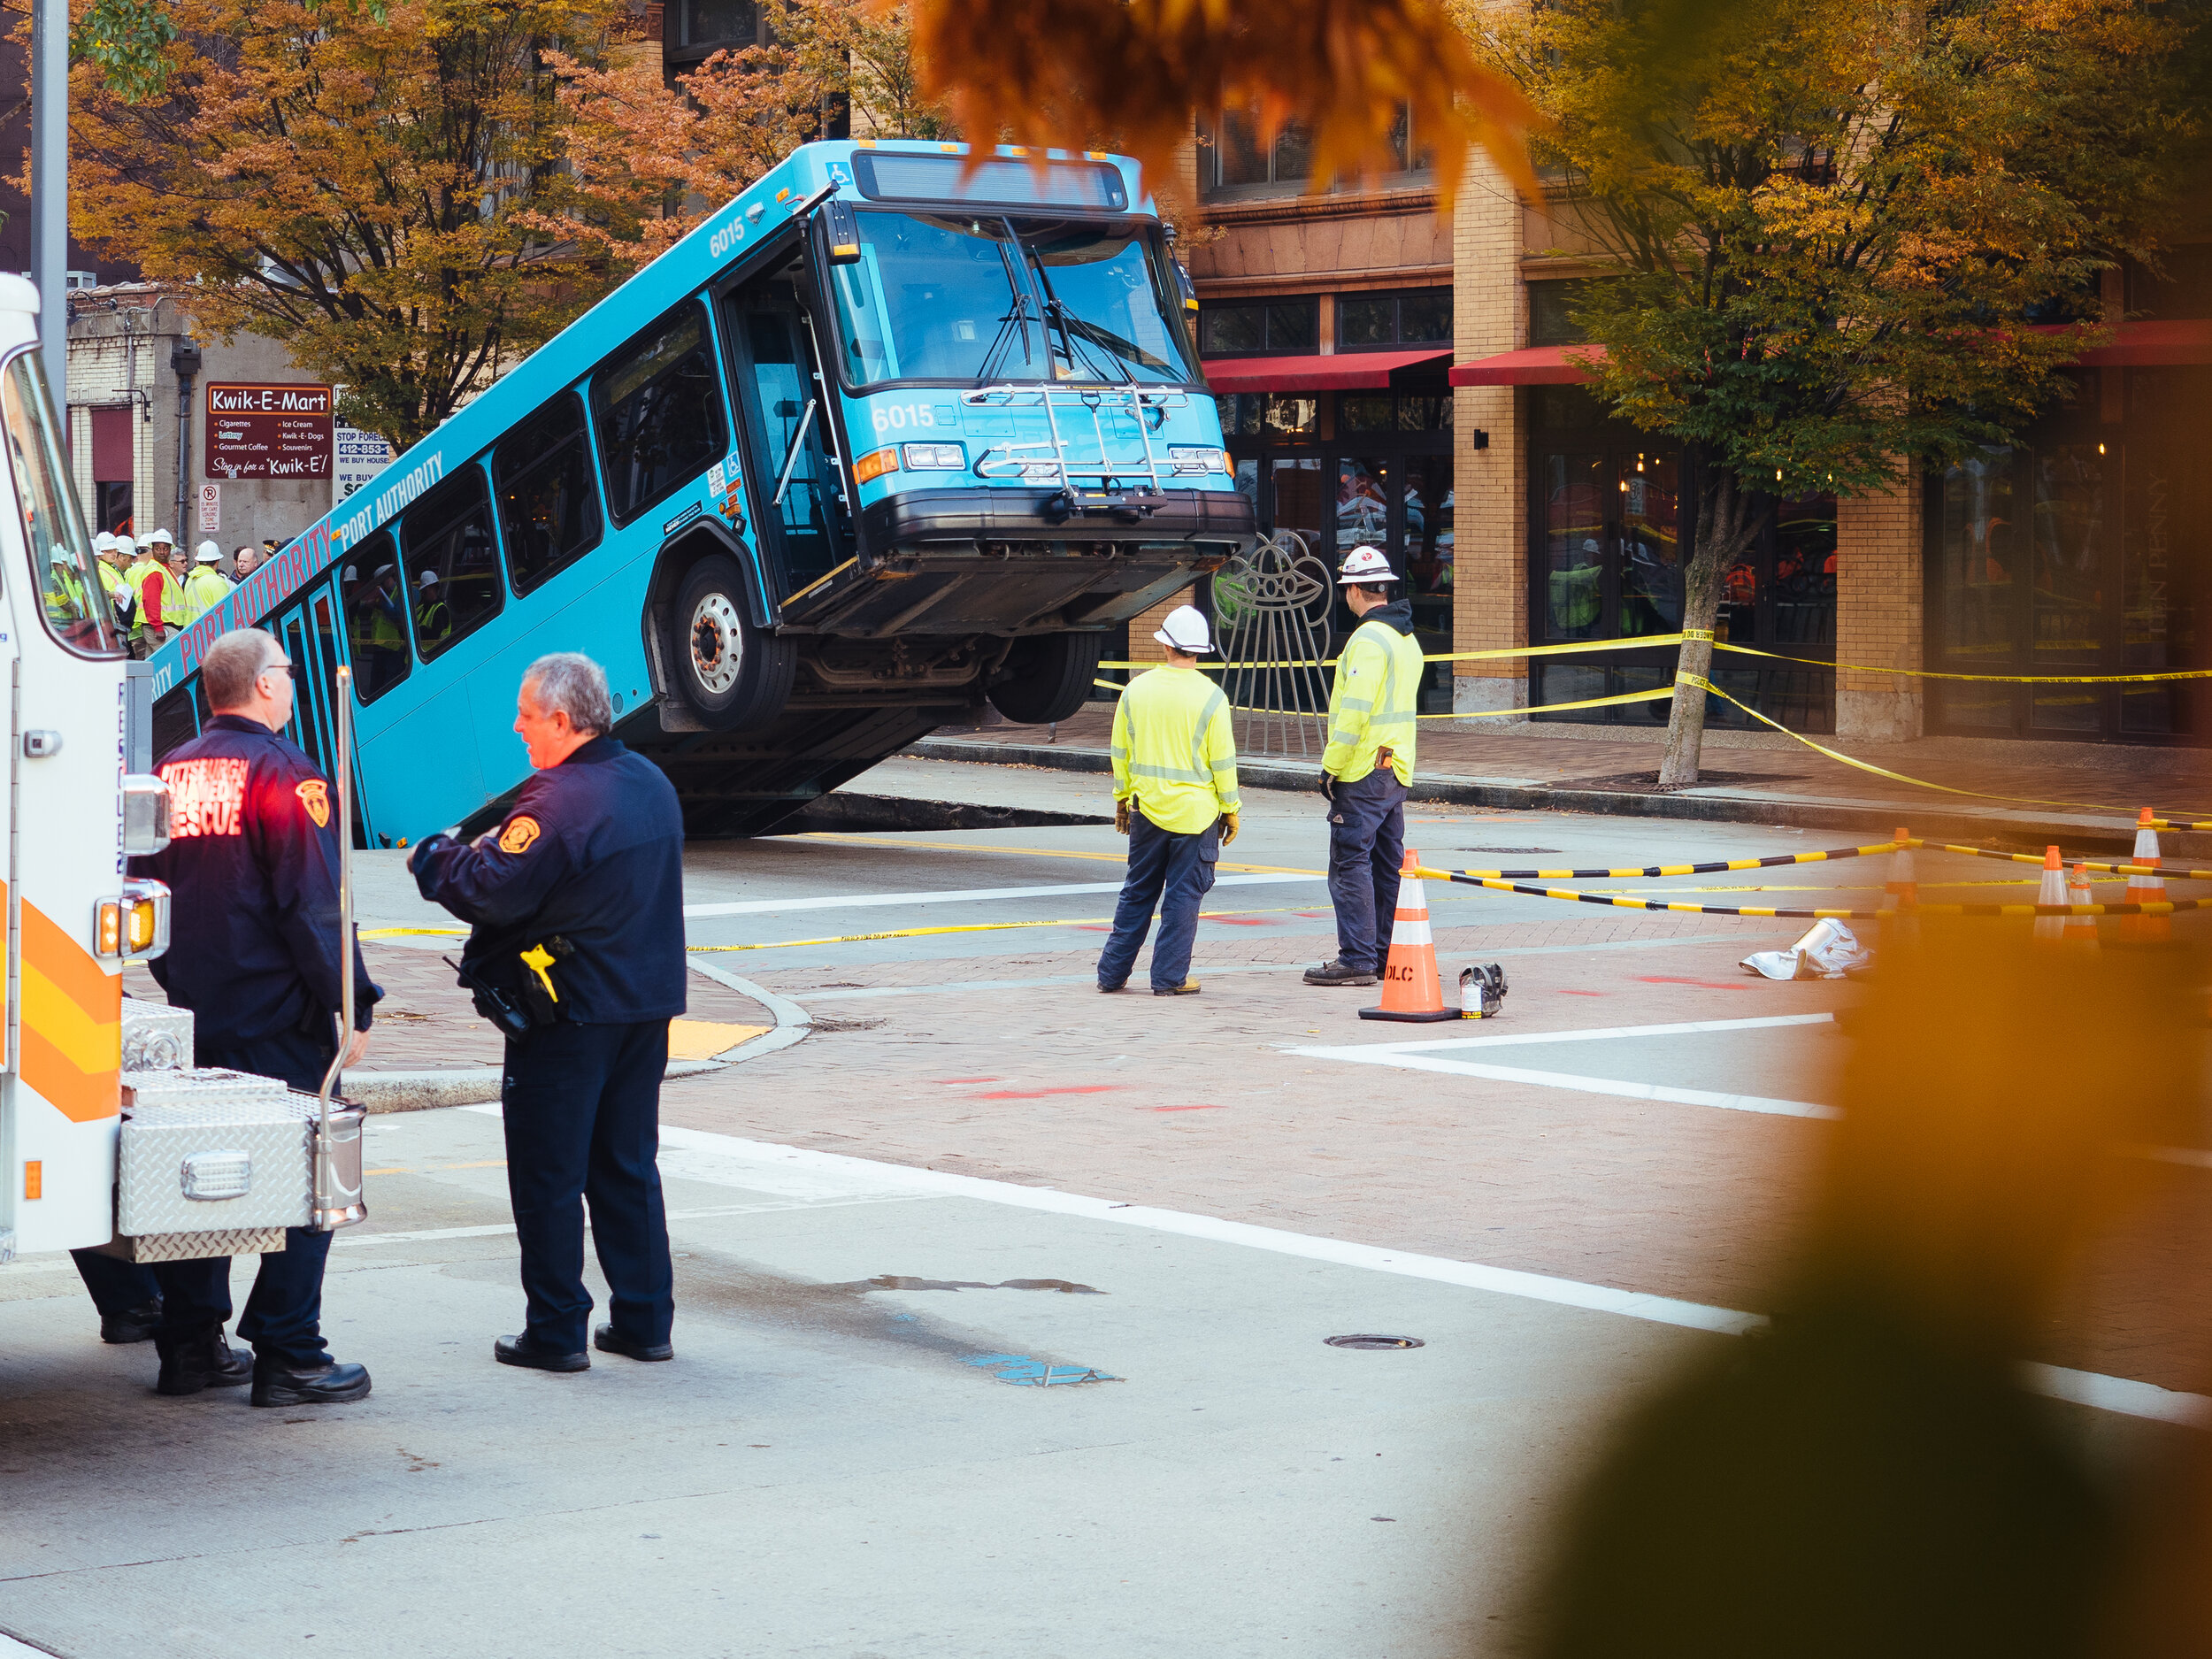  Port Authority bus 6015 fell in a sinkhole in Downtown Pittsburgh near the intersection of Penn Avenue and 10th Street on Oct. 28, 2019. 